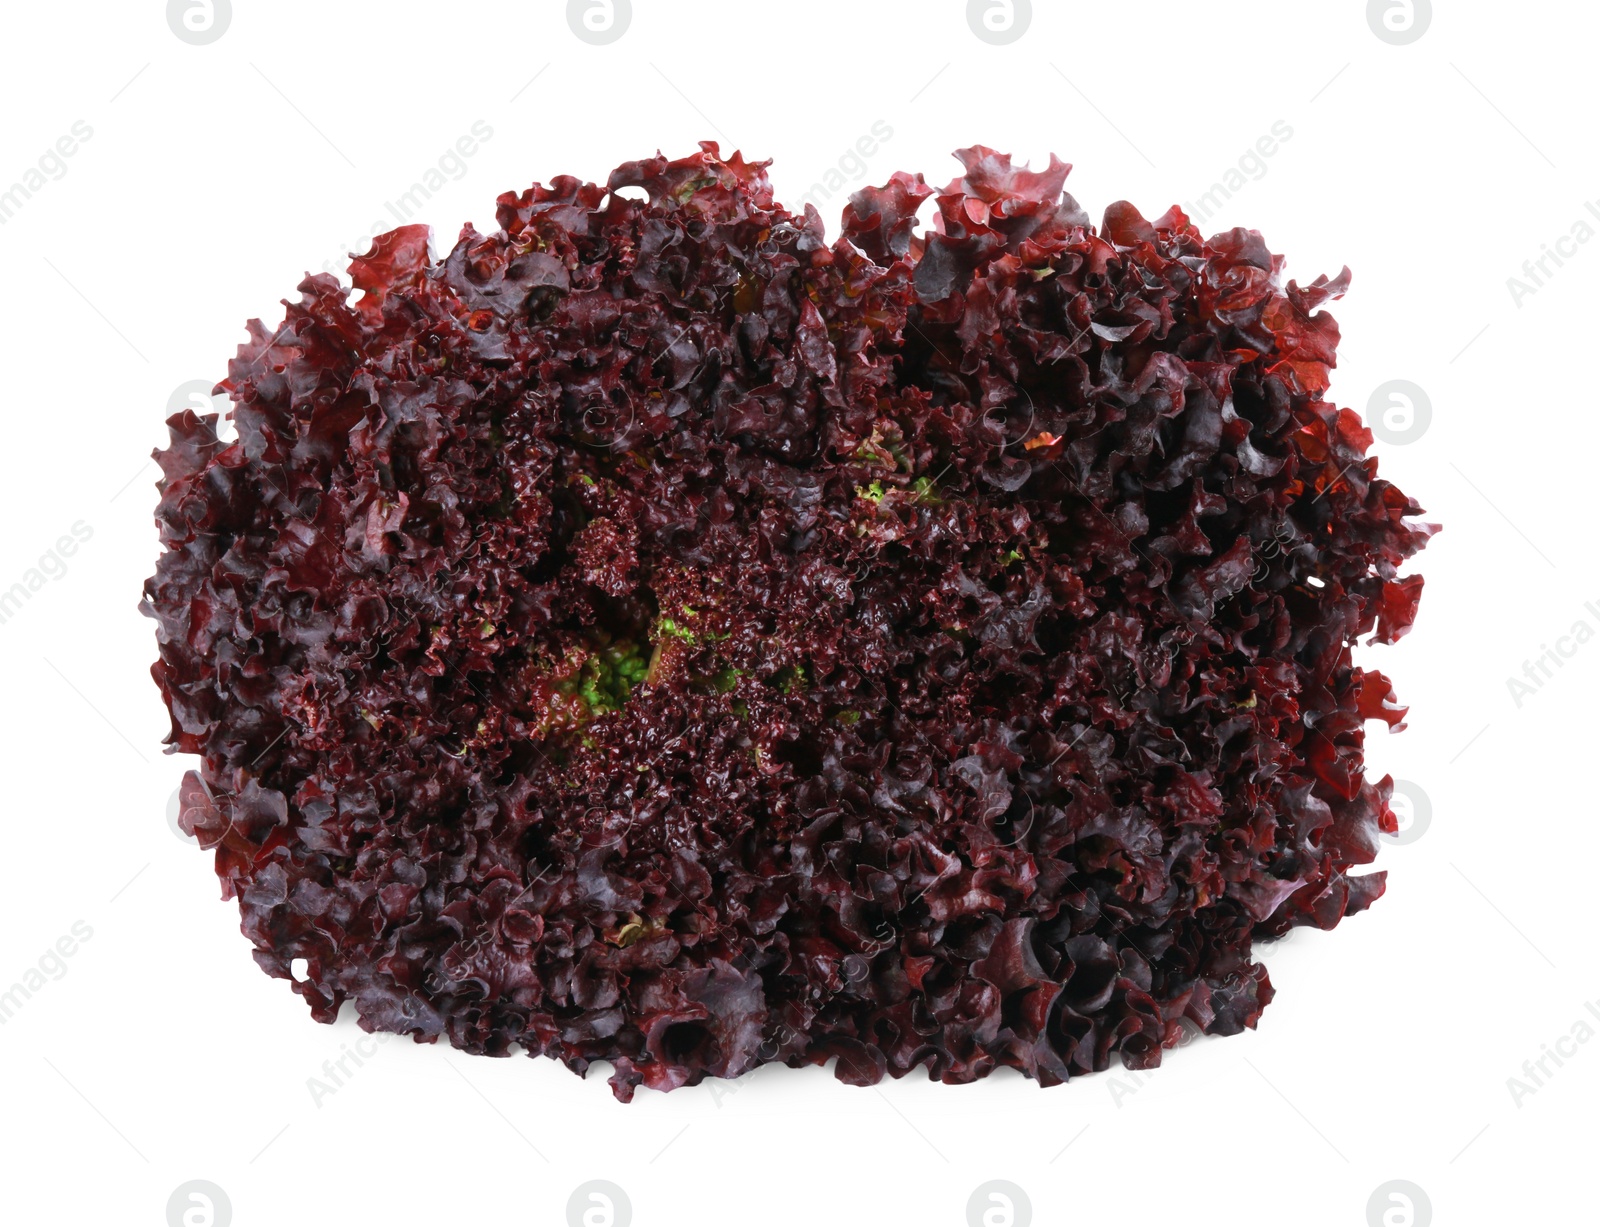 Photo of Head of fresh red coral lettuce isolated on white